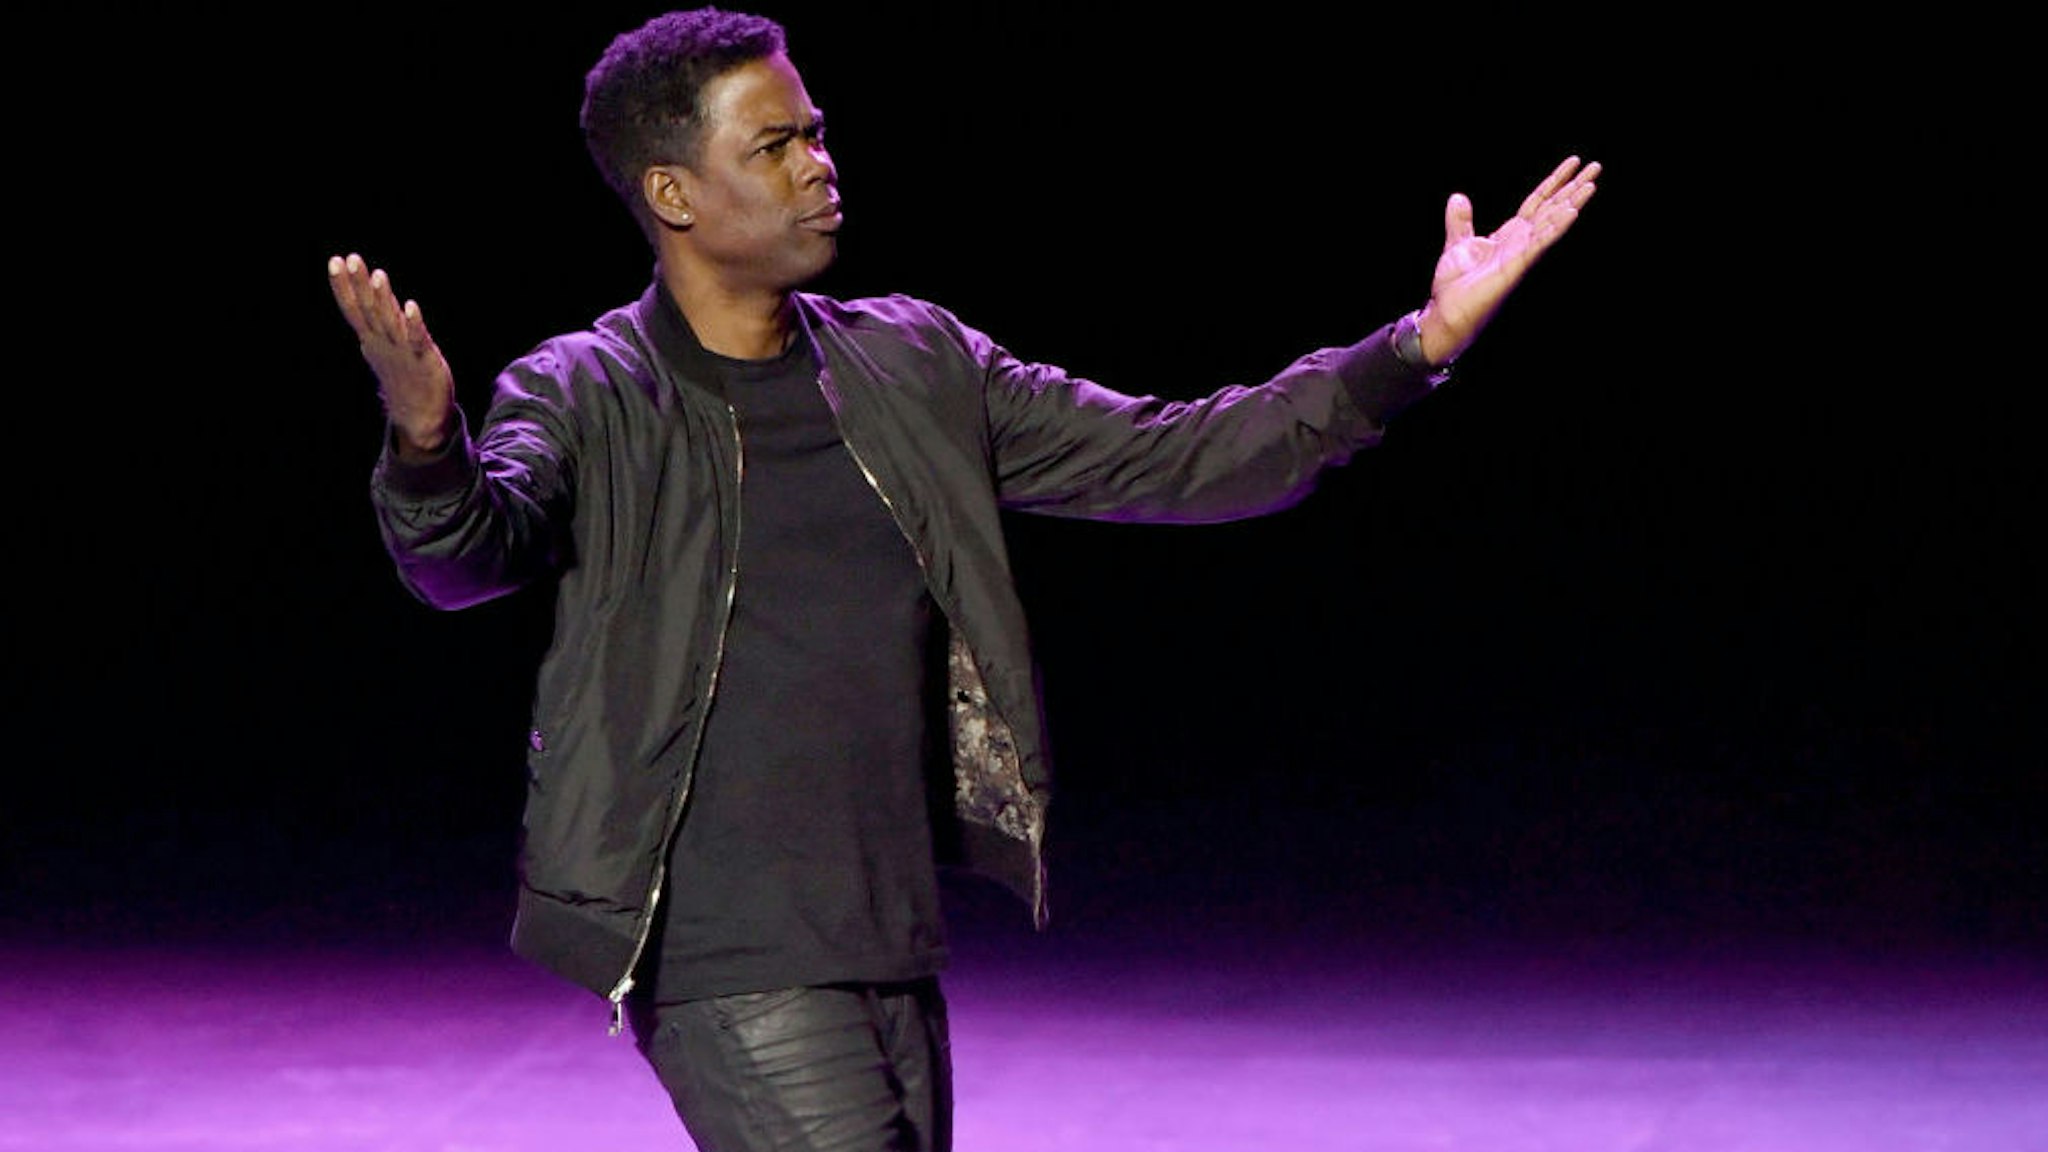 Comedian/actor Chris Rock performs his stand-up comedy routine during a stop of his Total Blackout tour at Park Theater at Monte Carlo Resort and Casino on June 10, 2017 in Las Vegas, Nevada.